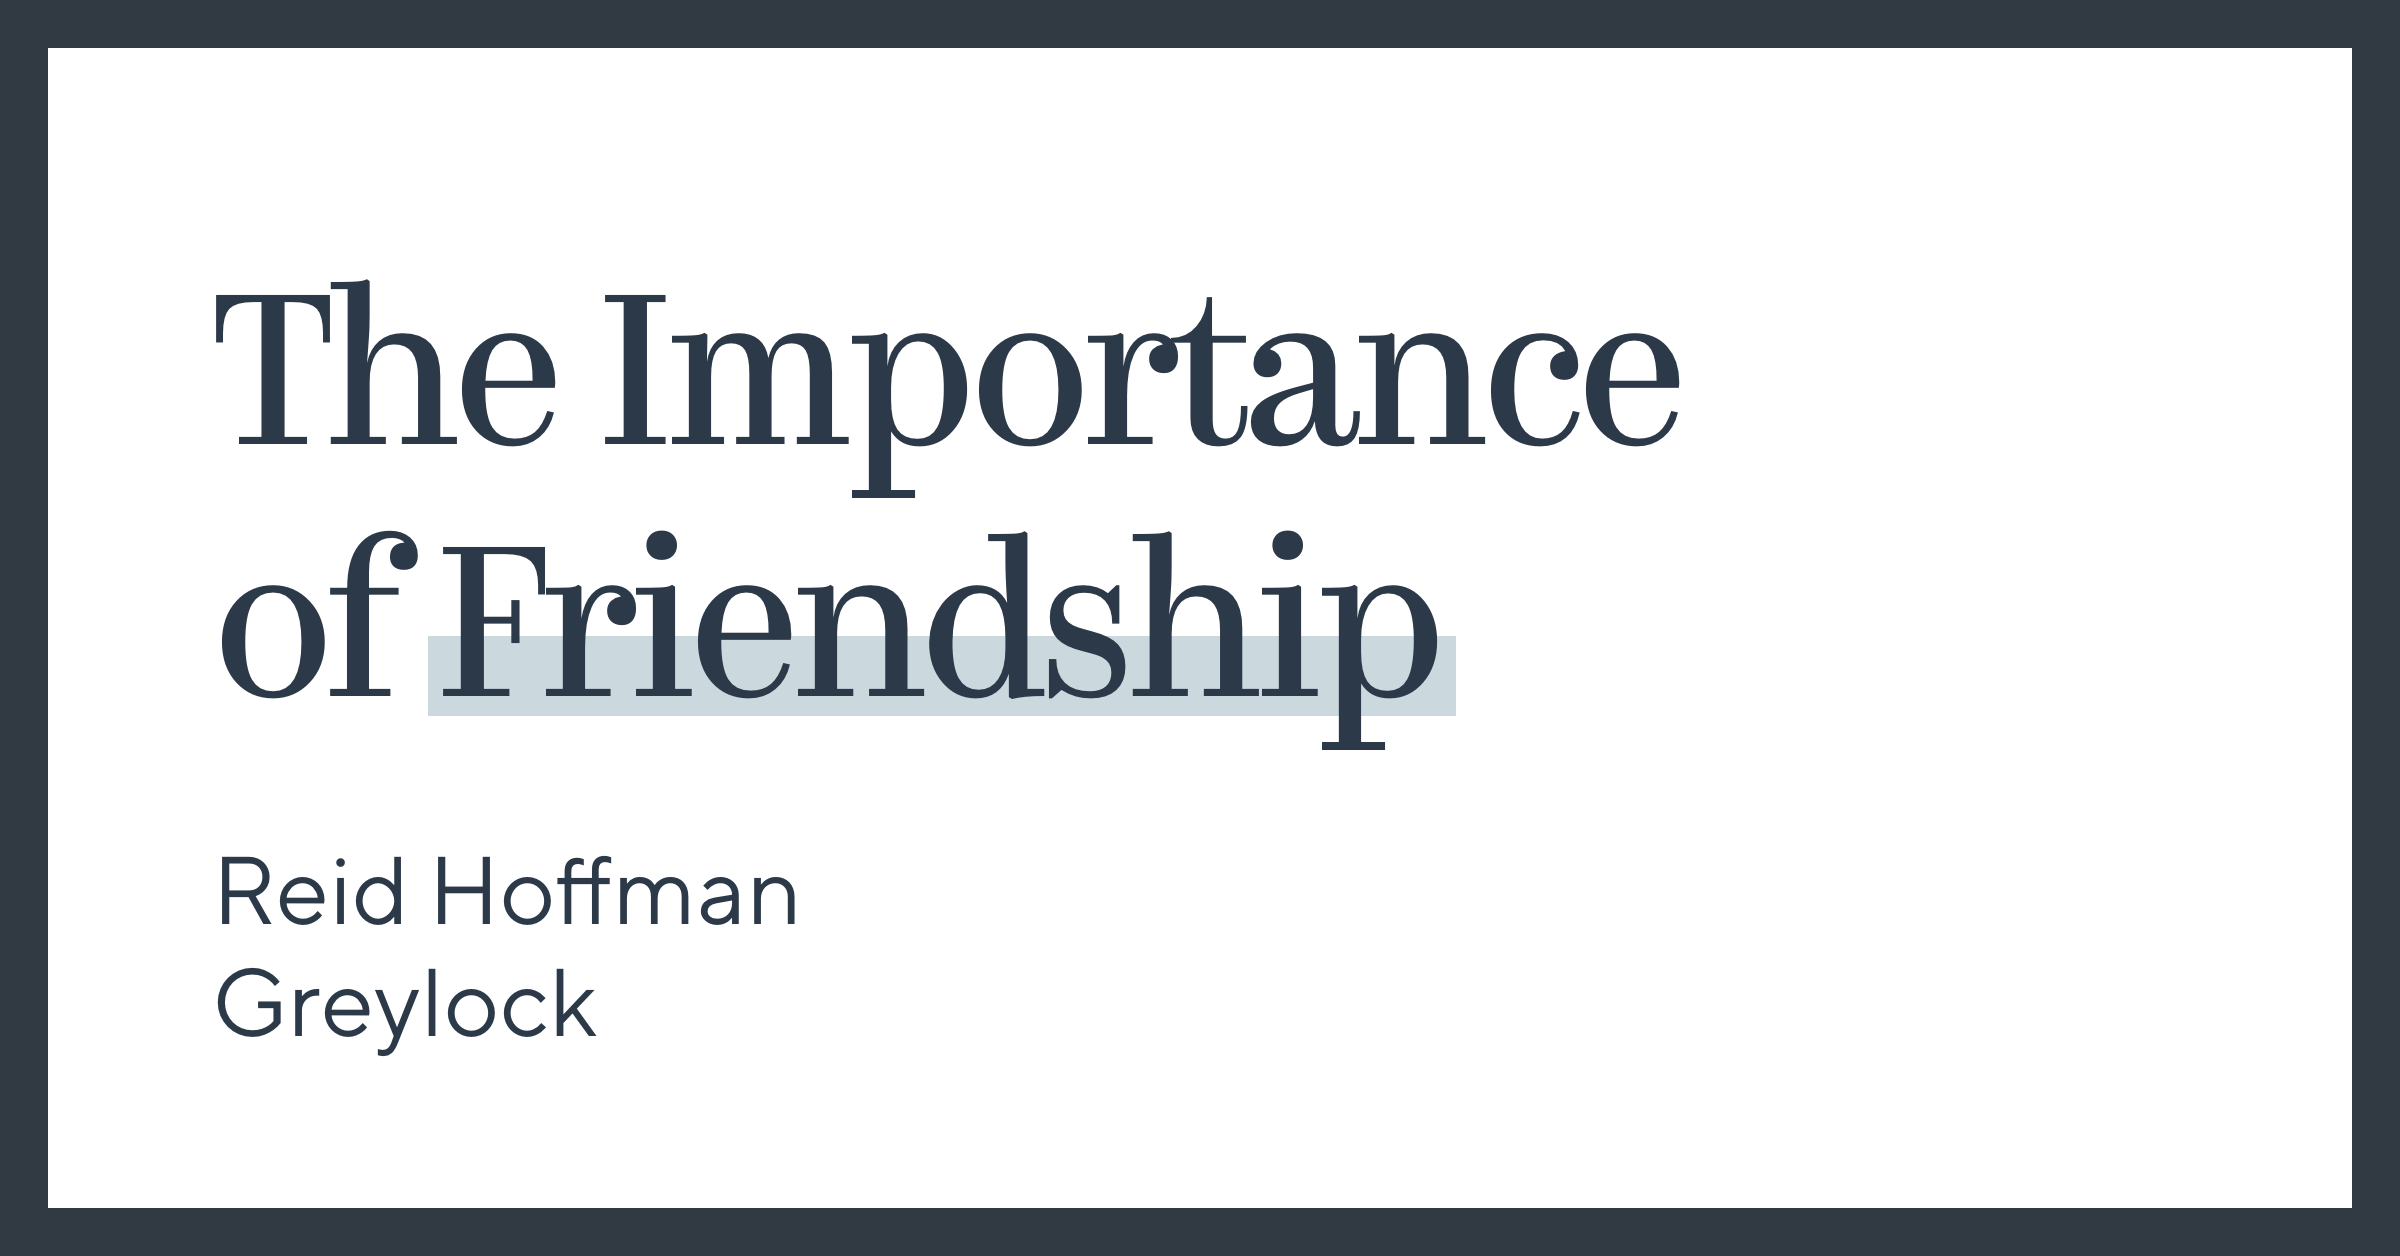 The Importance of Friendship